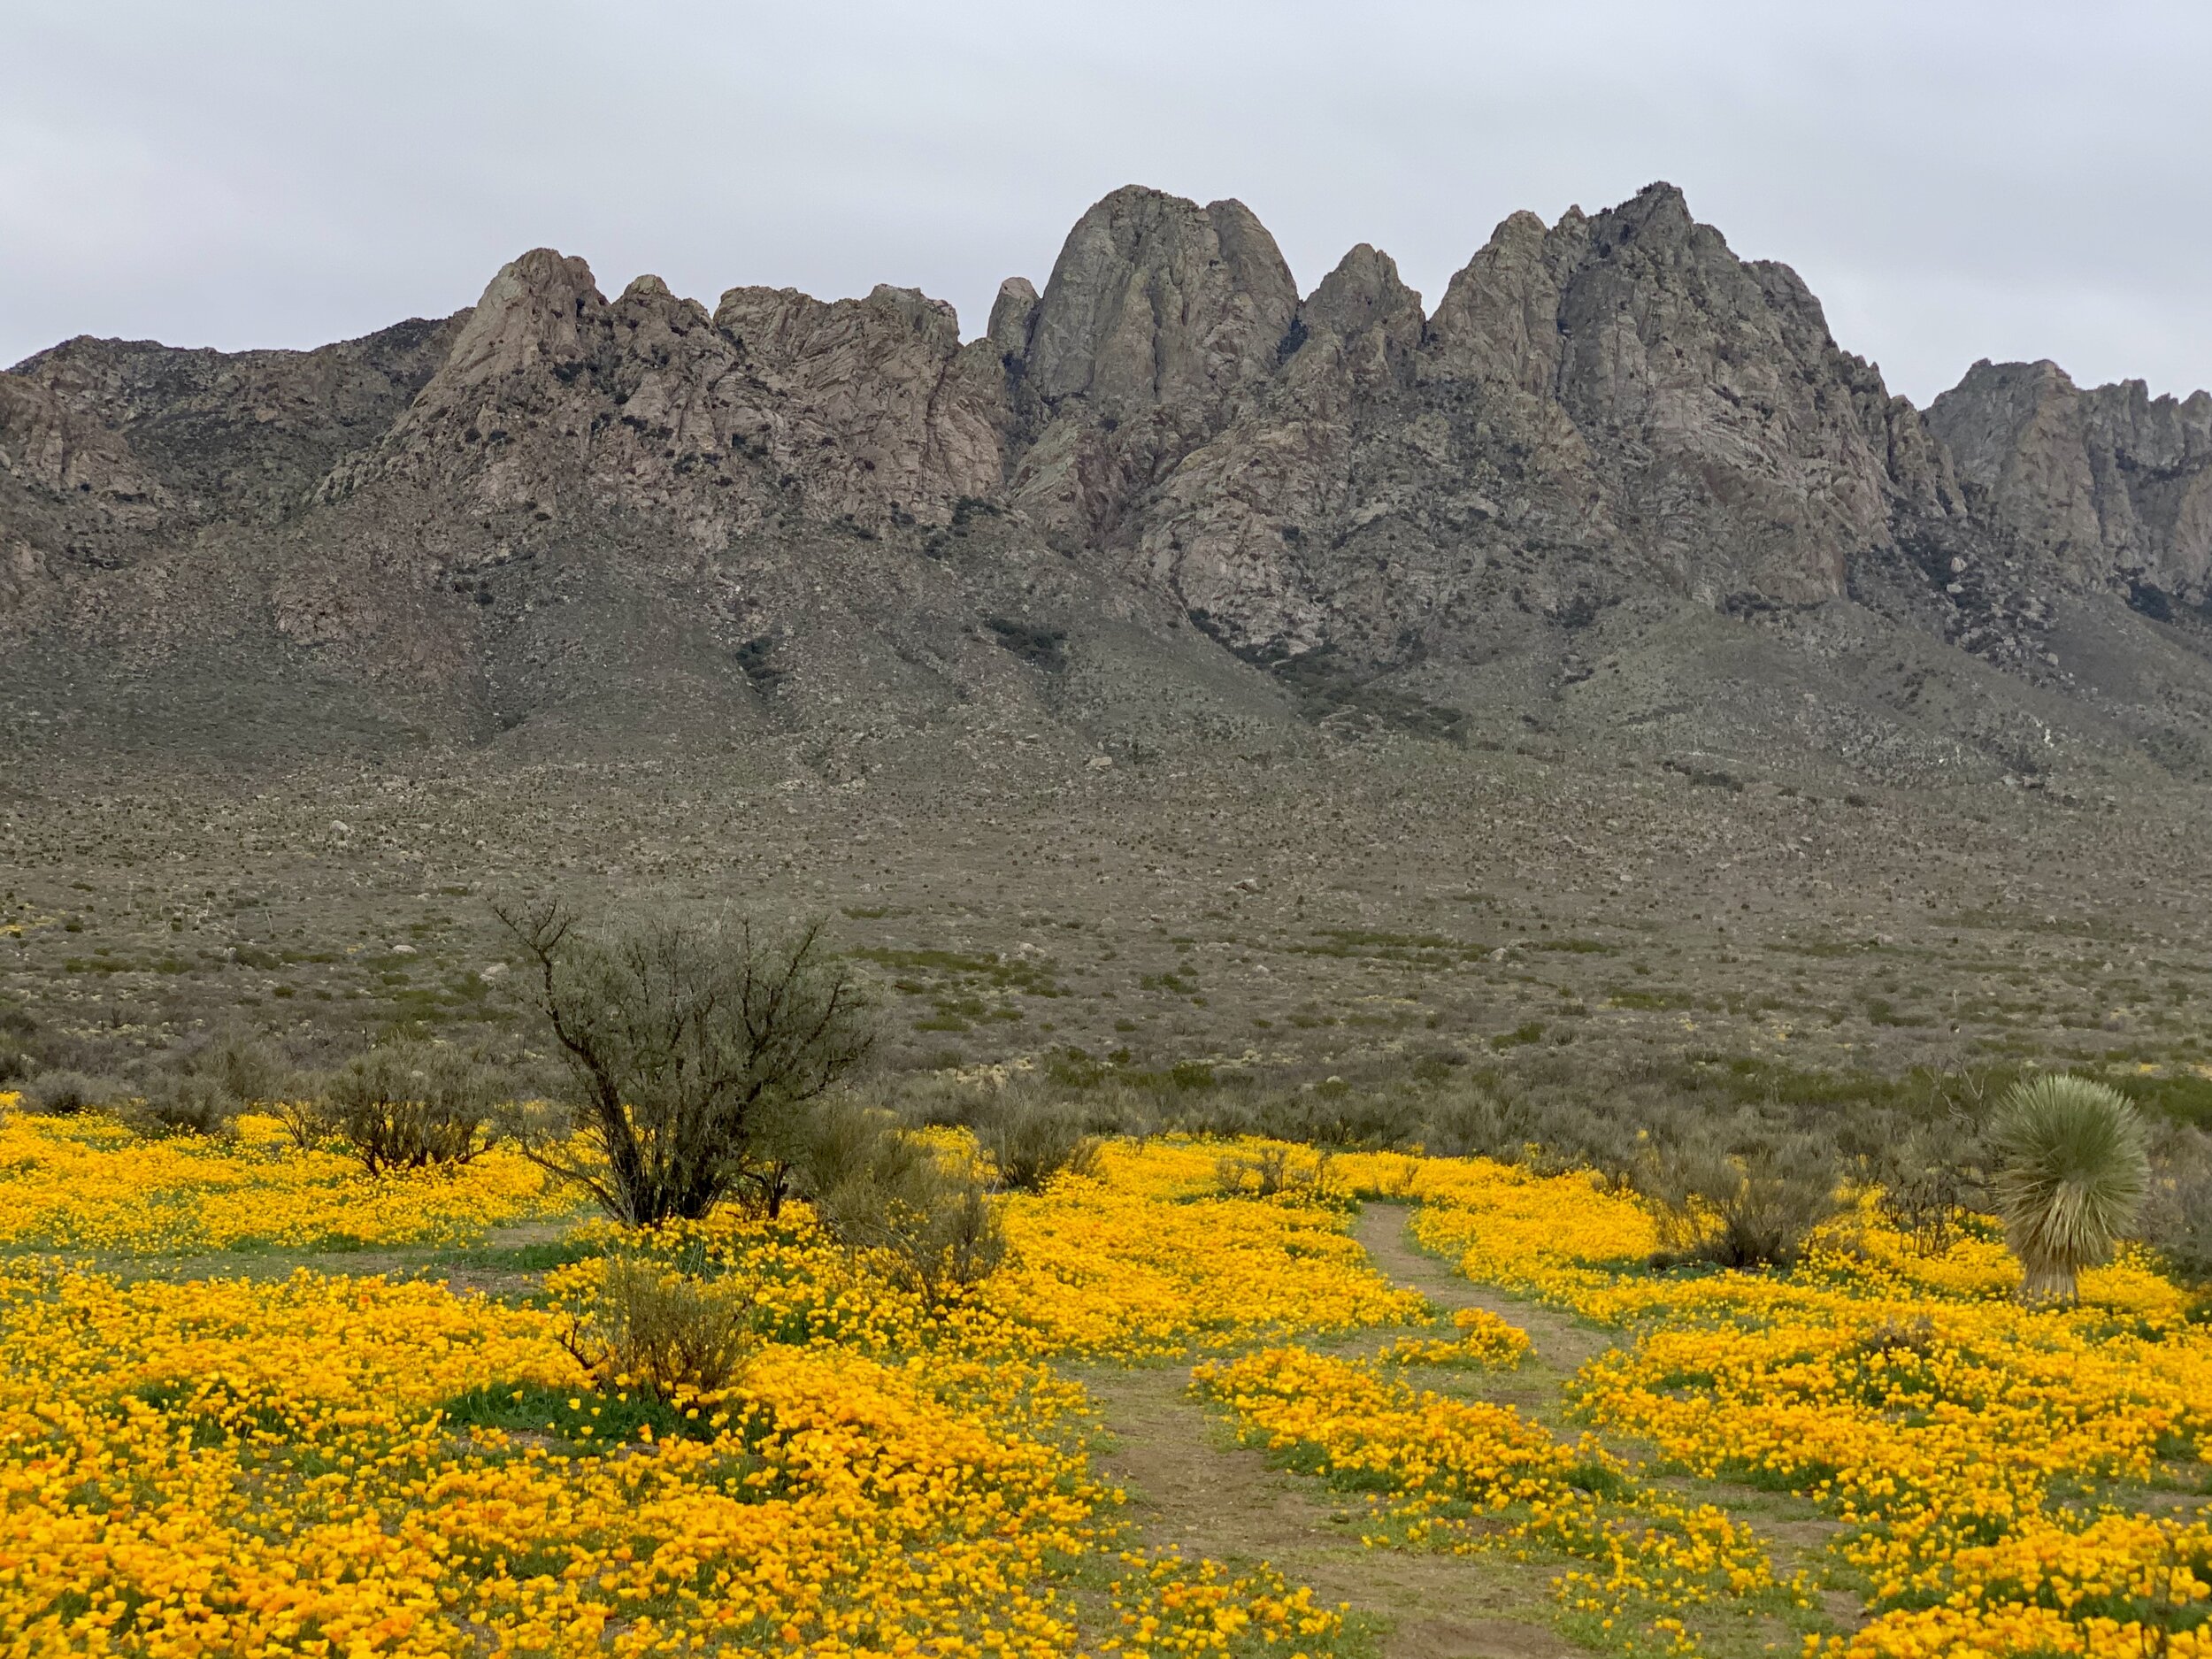  Early spring in the southwest has provided opportunity to see lovely desert flowers in bloom. While out driving, we found acres of Mexican Gold Poppies that looked just like those in the old 1000-piece, mountain-scene puzzles we used to do back in t